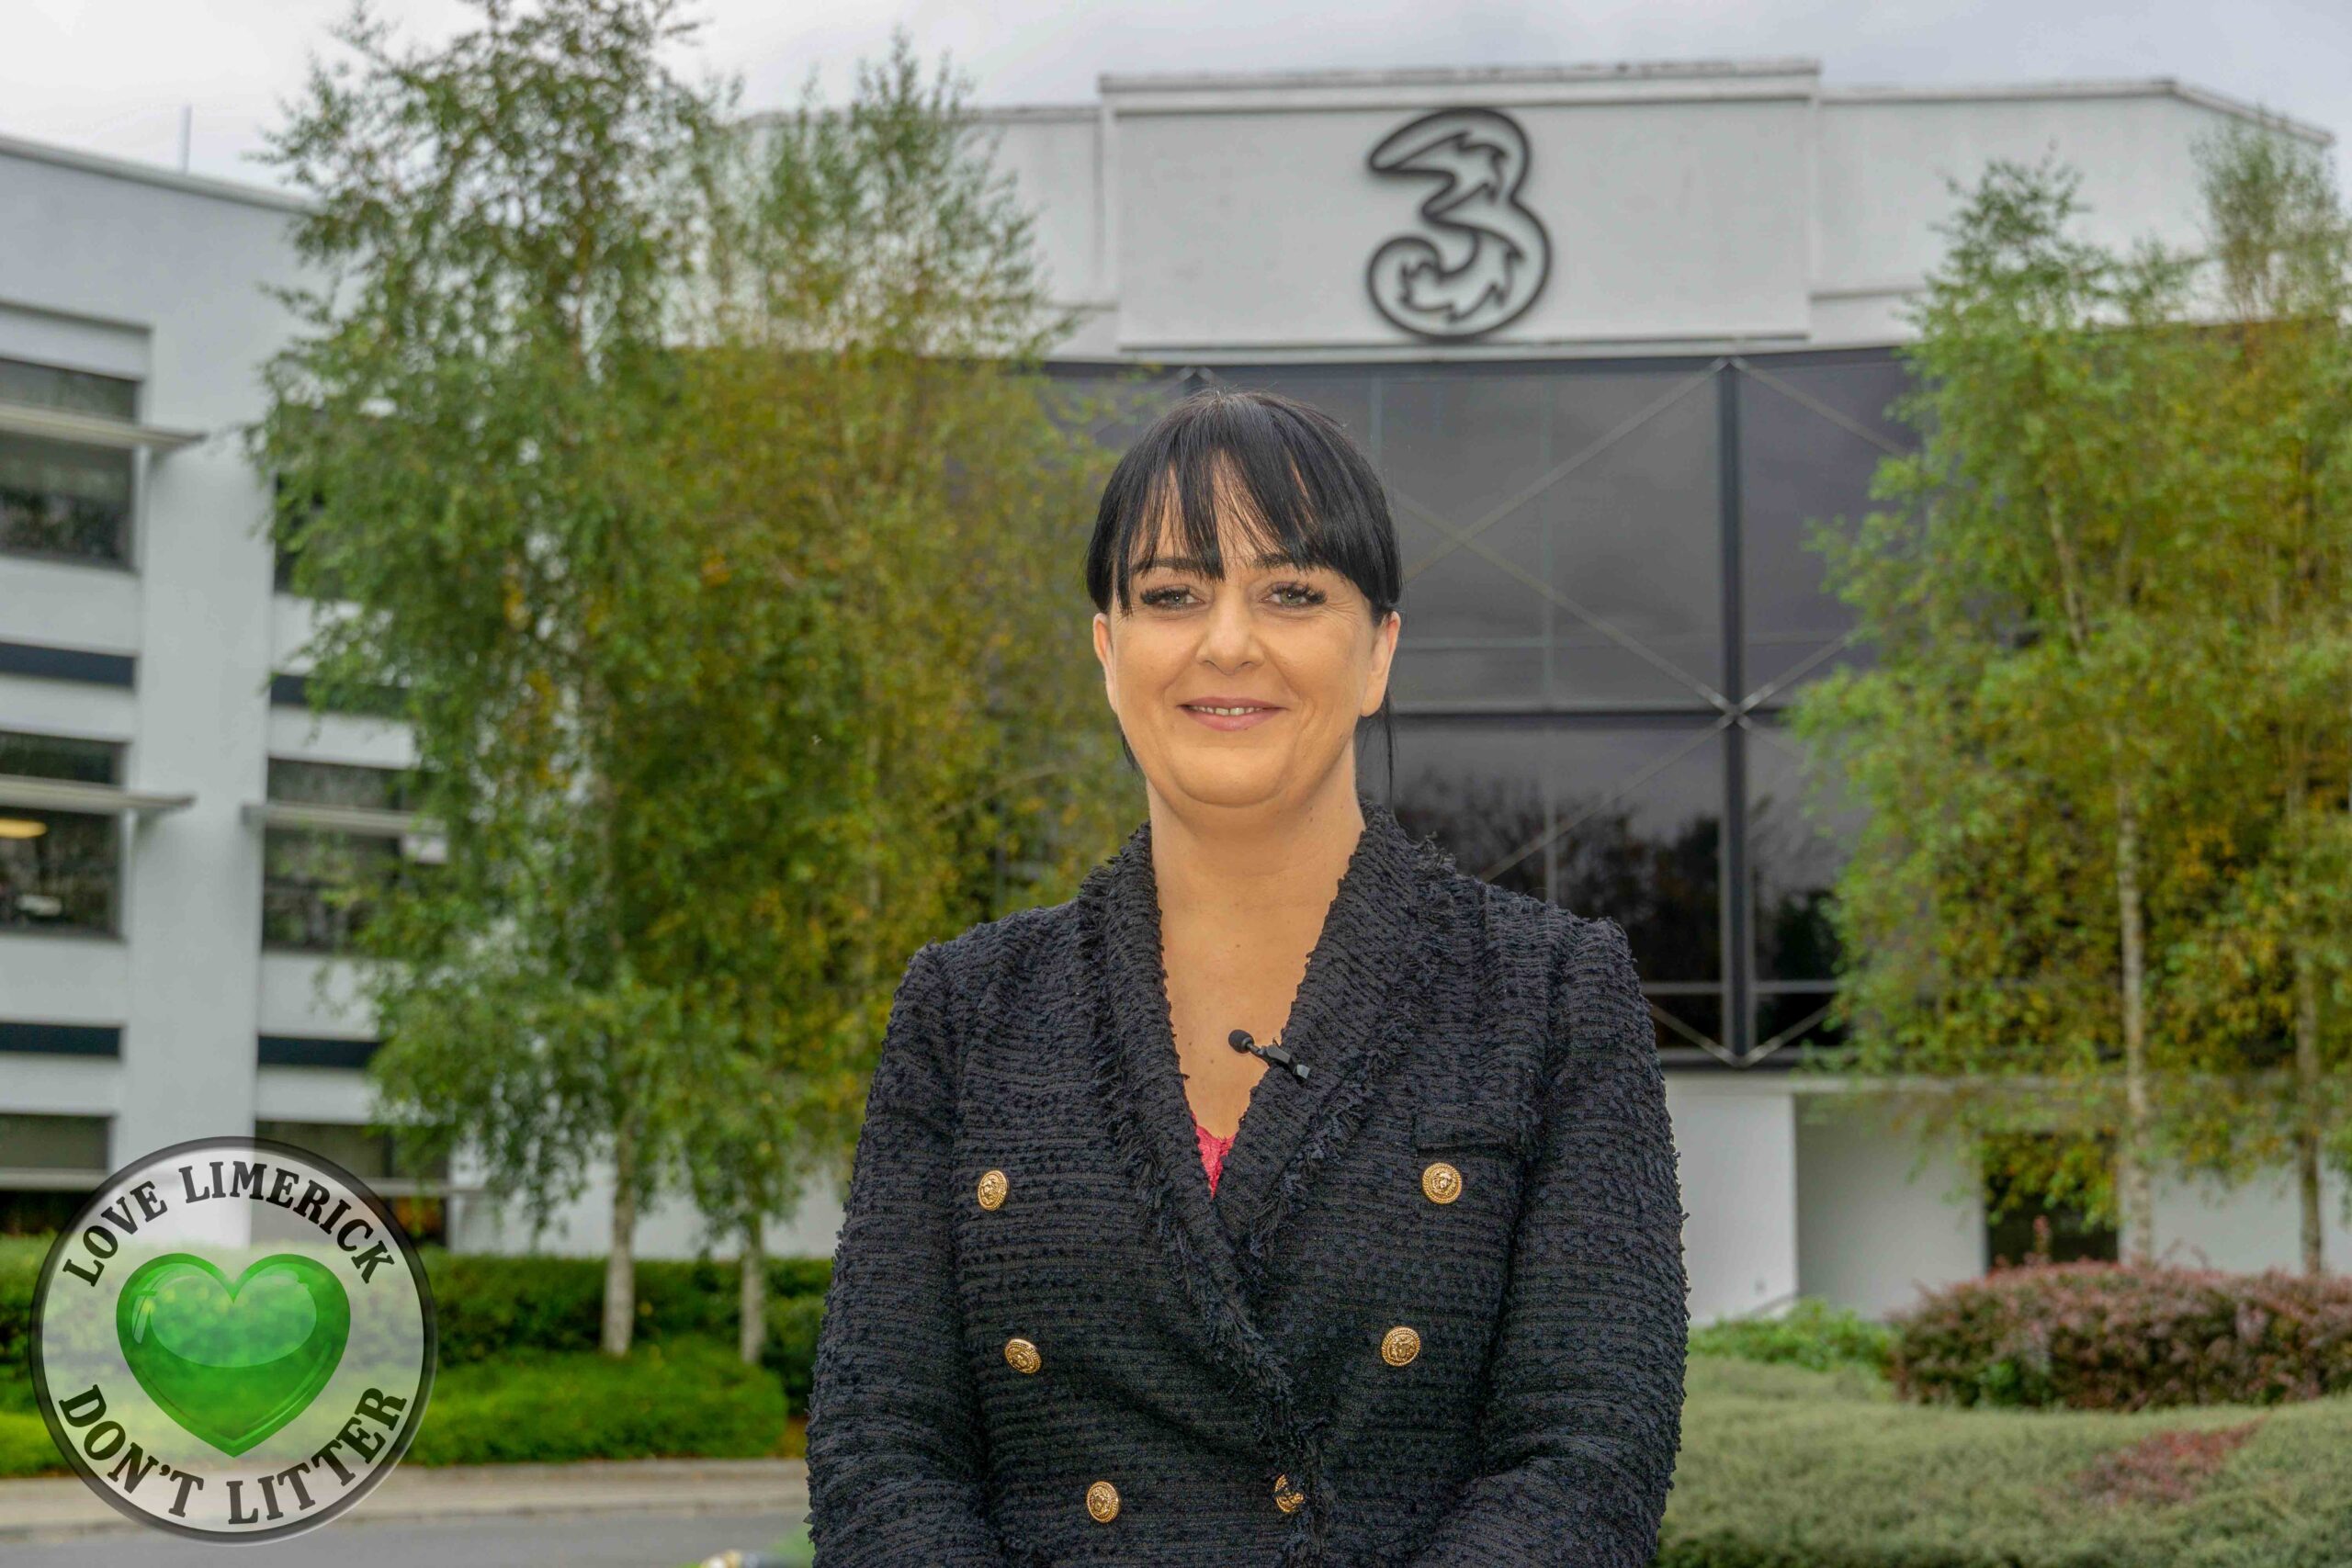 Career Longevity with Three Ireland - Carol Bonfield, an Account Relationship Manager with Three Ireland has been working with the company for 22 years. Pictured here at Three Ireland in Castletroy, Limerick. Picture: Krzysztof Luszczki/ilovelimerick